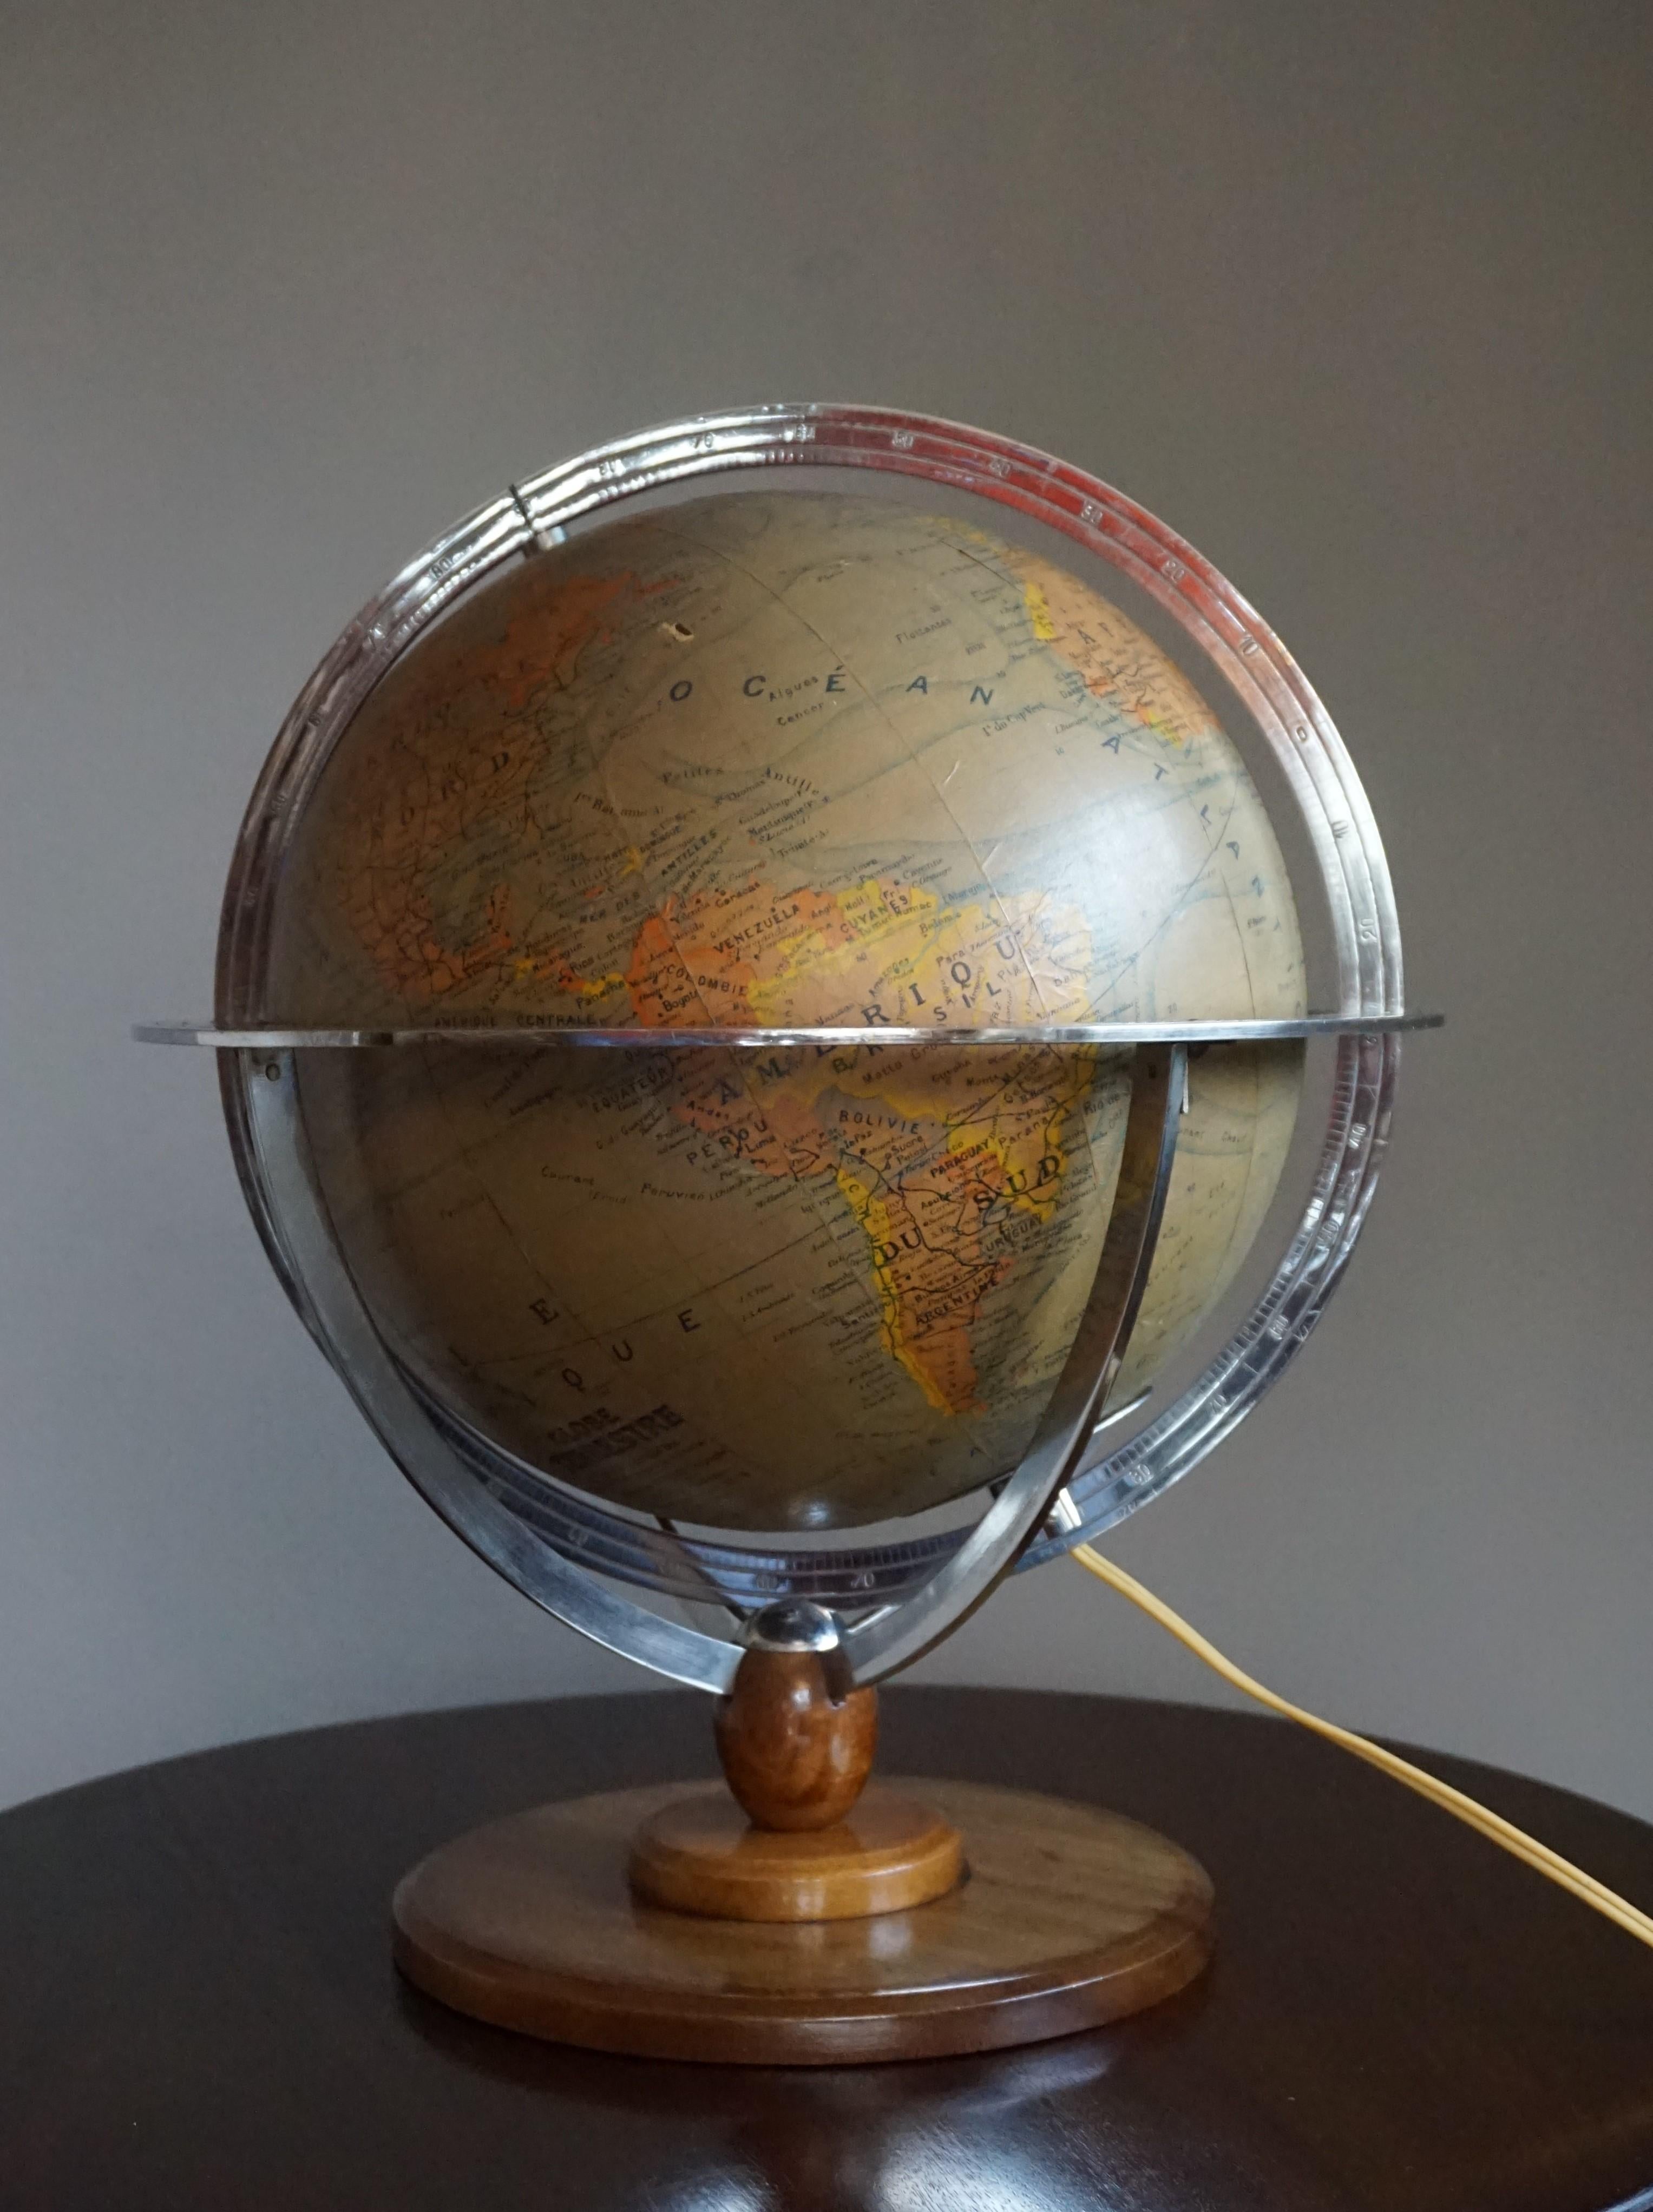 Quality made, metal and glass desk globe on a wooden base.

If you are looking for stylish and beautiful quality items to upgrade your interior (whether at home or in your office) then this Parisian globe could be ideal. Looking at a globe always